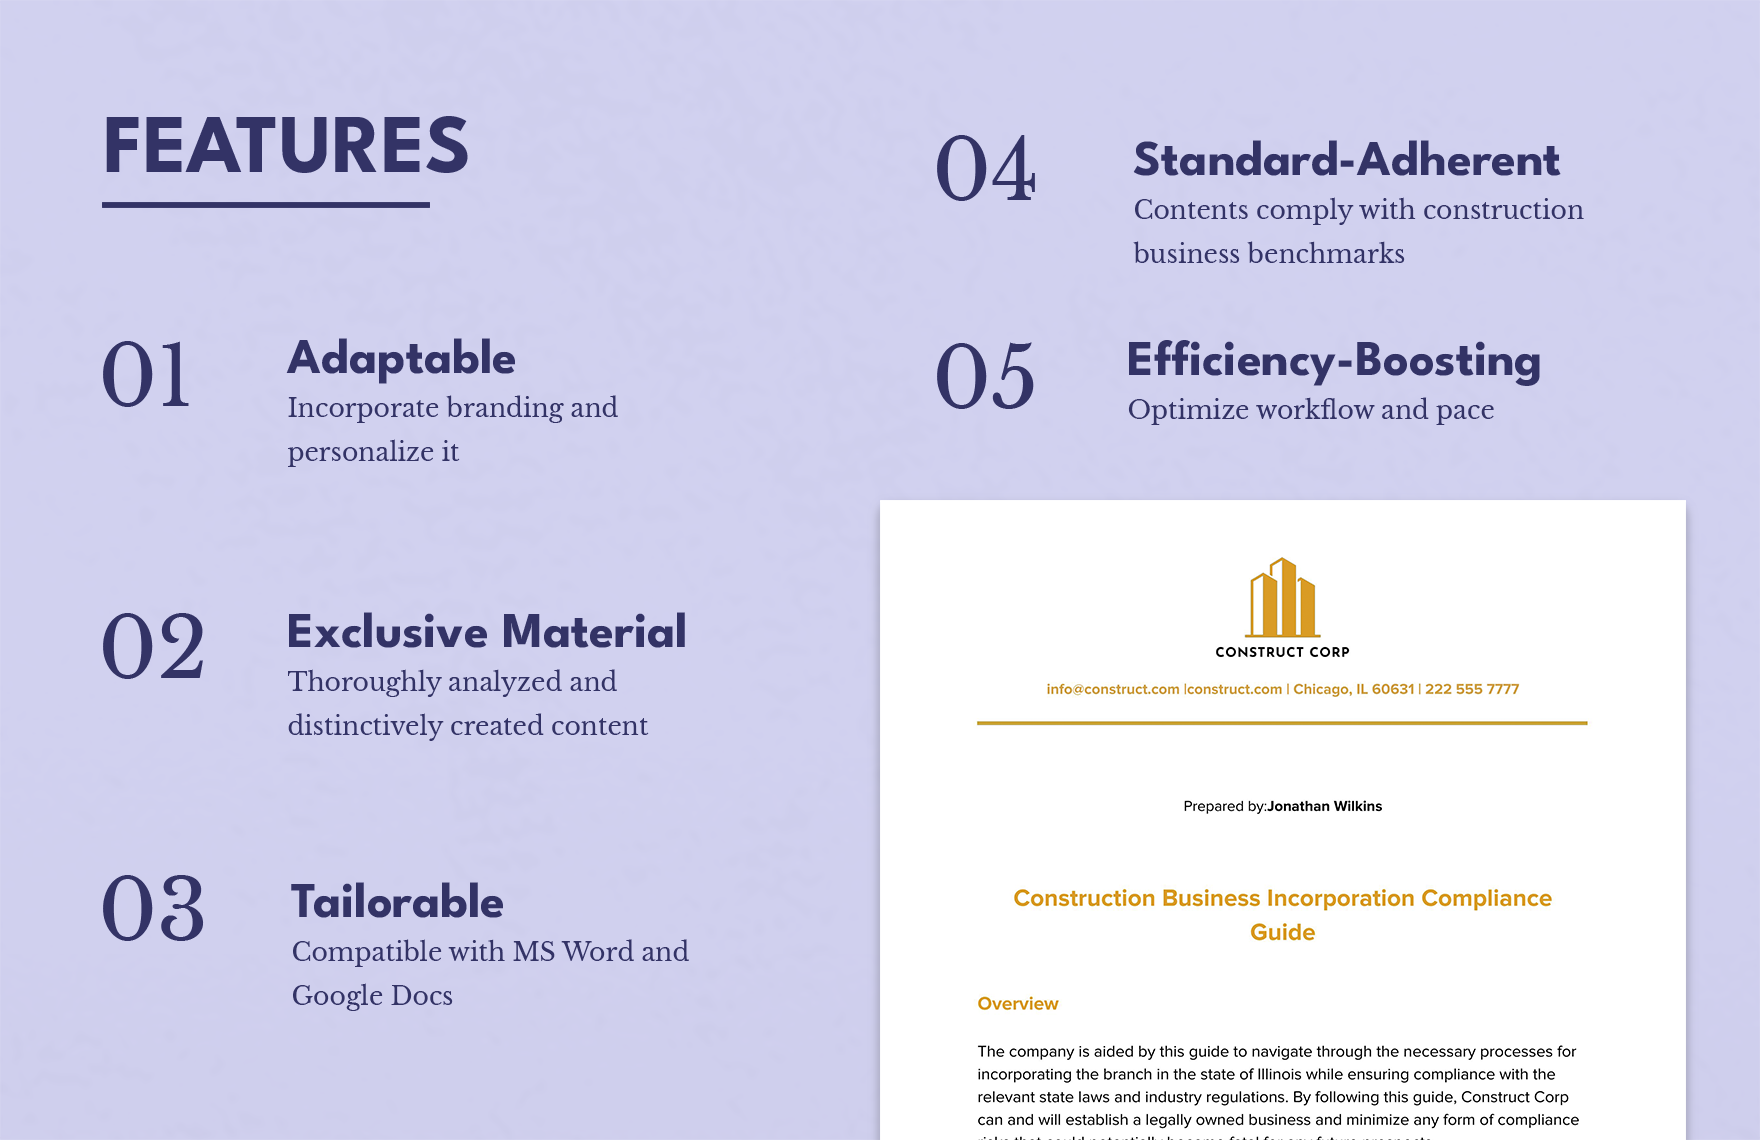 Construction Business Incorporation Compliance Guide